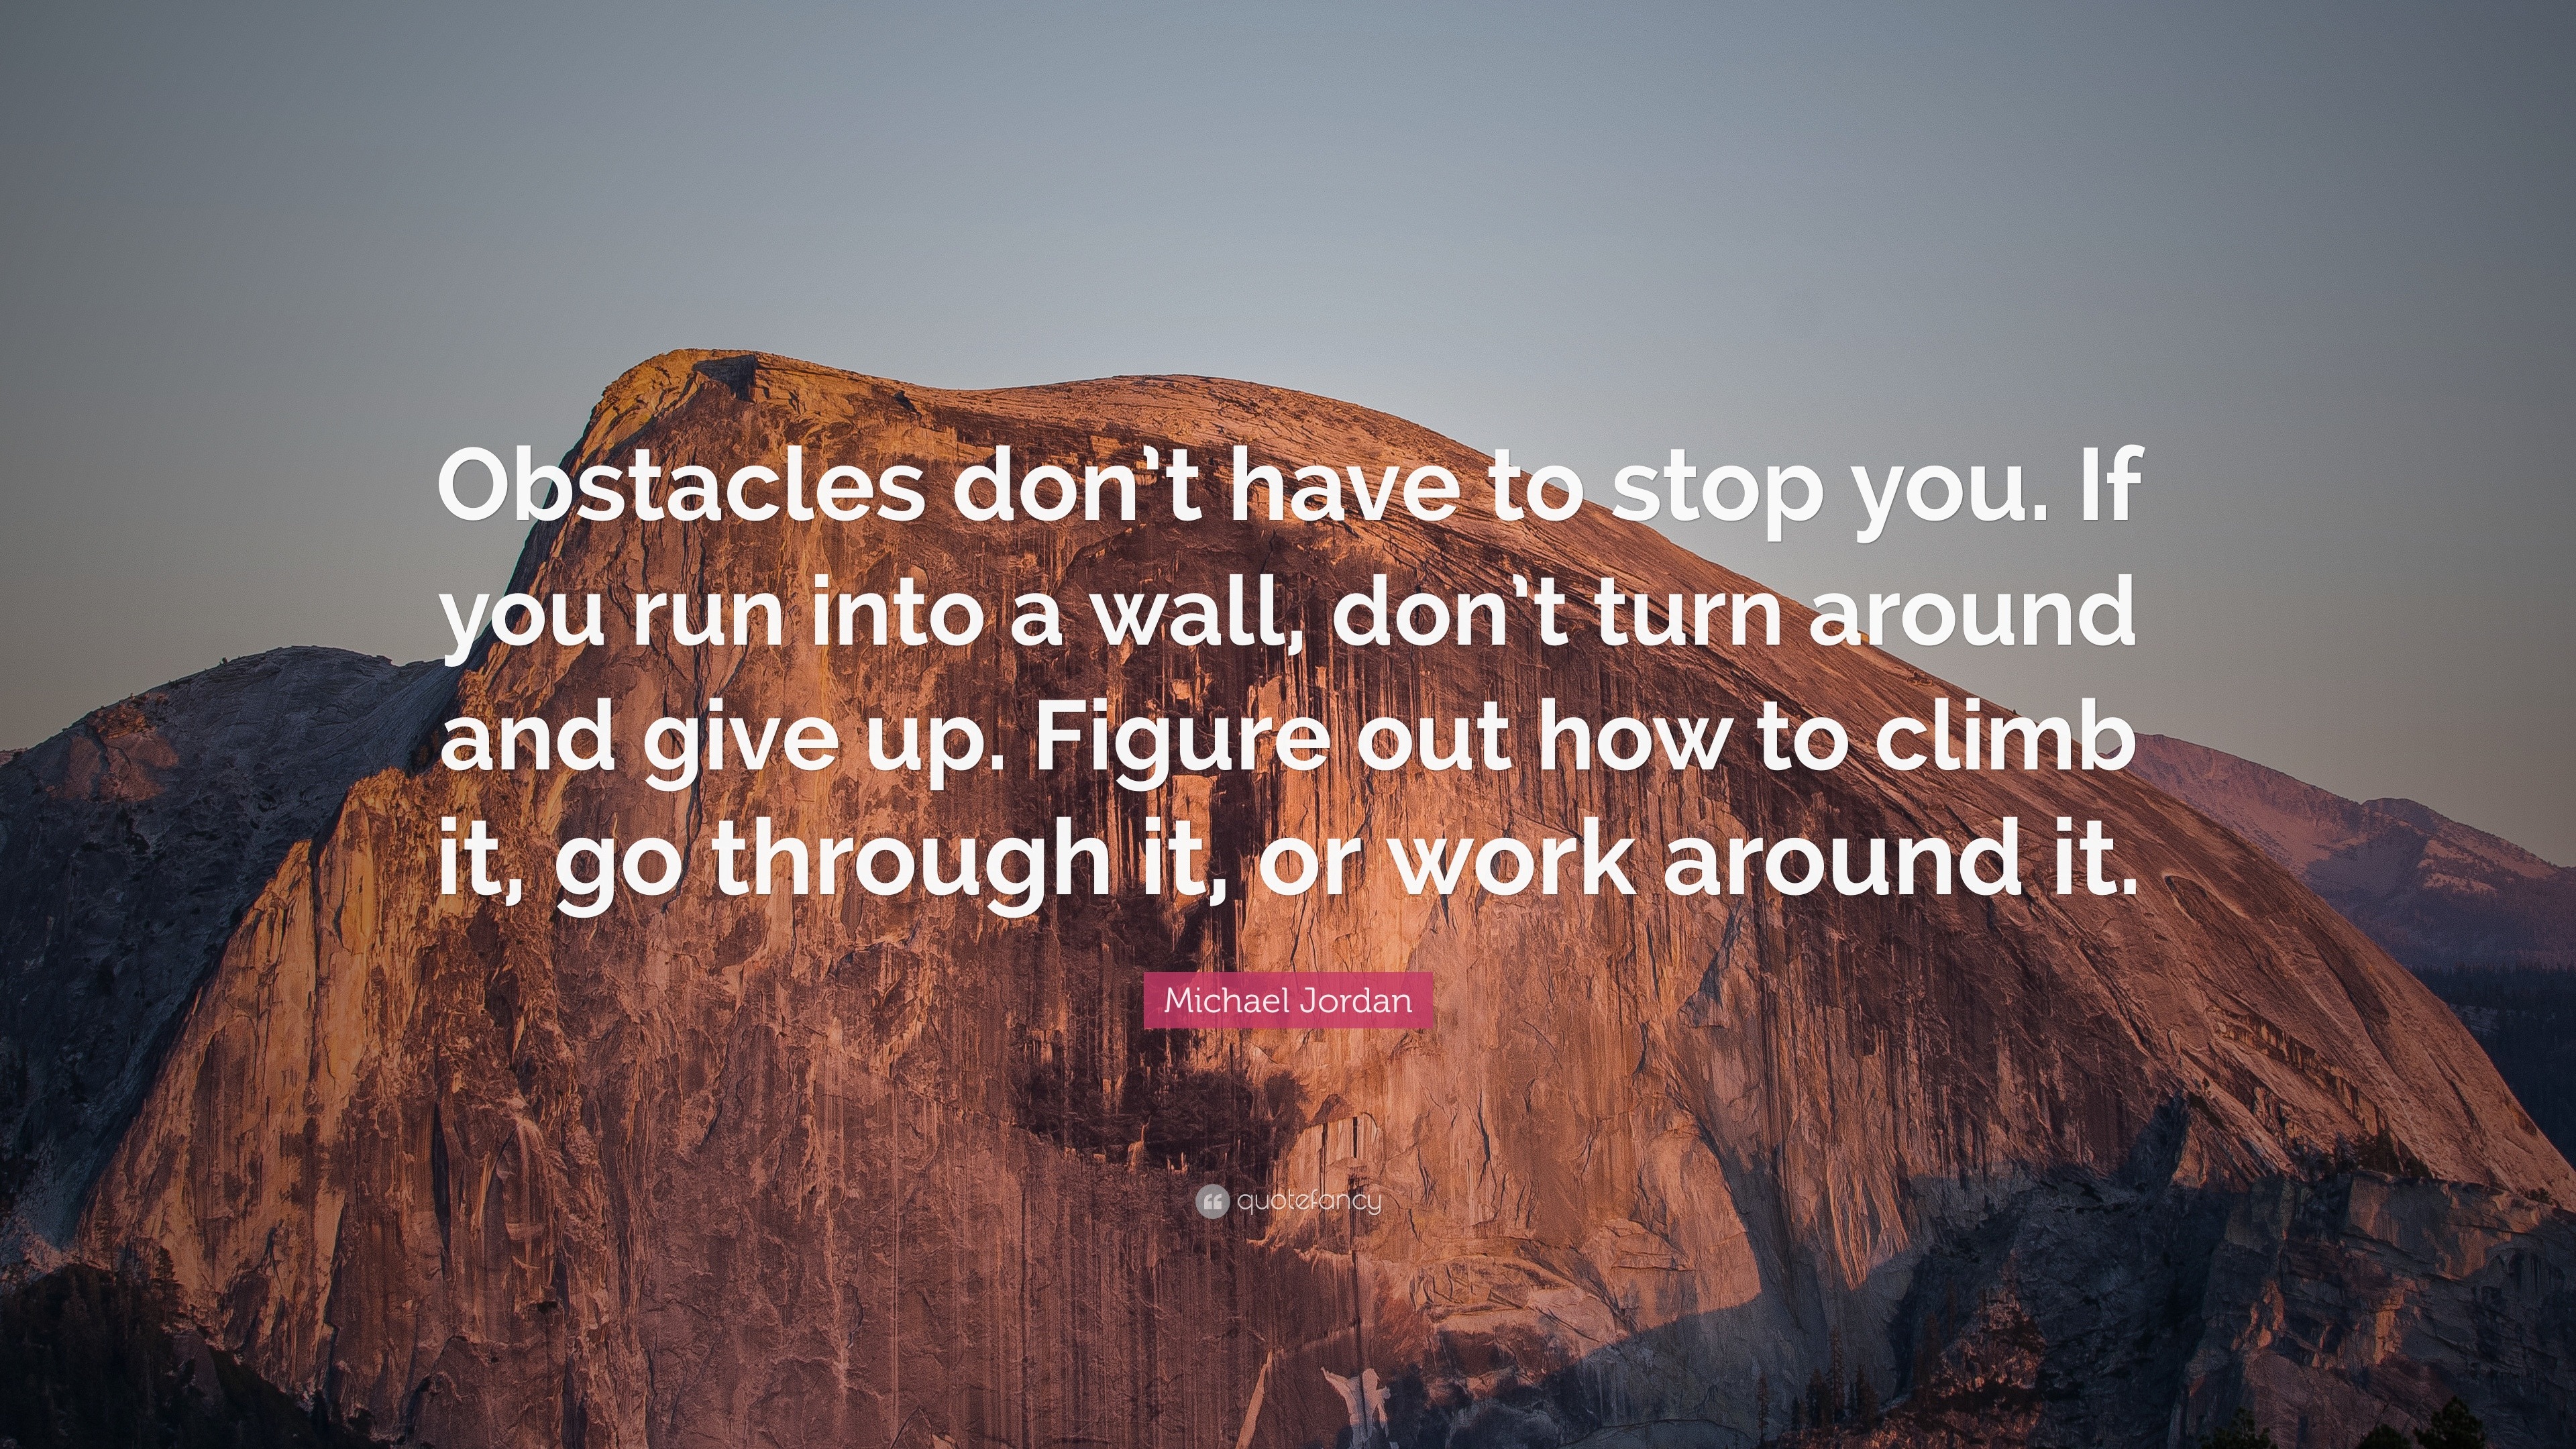 Michael Jordan Quote: “Obstacles don’t have to stop you. If you run